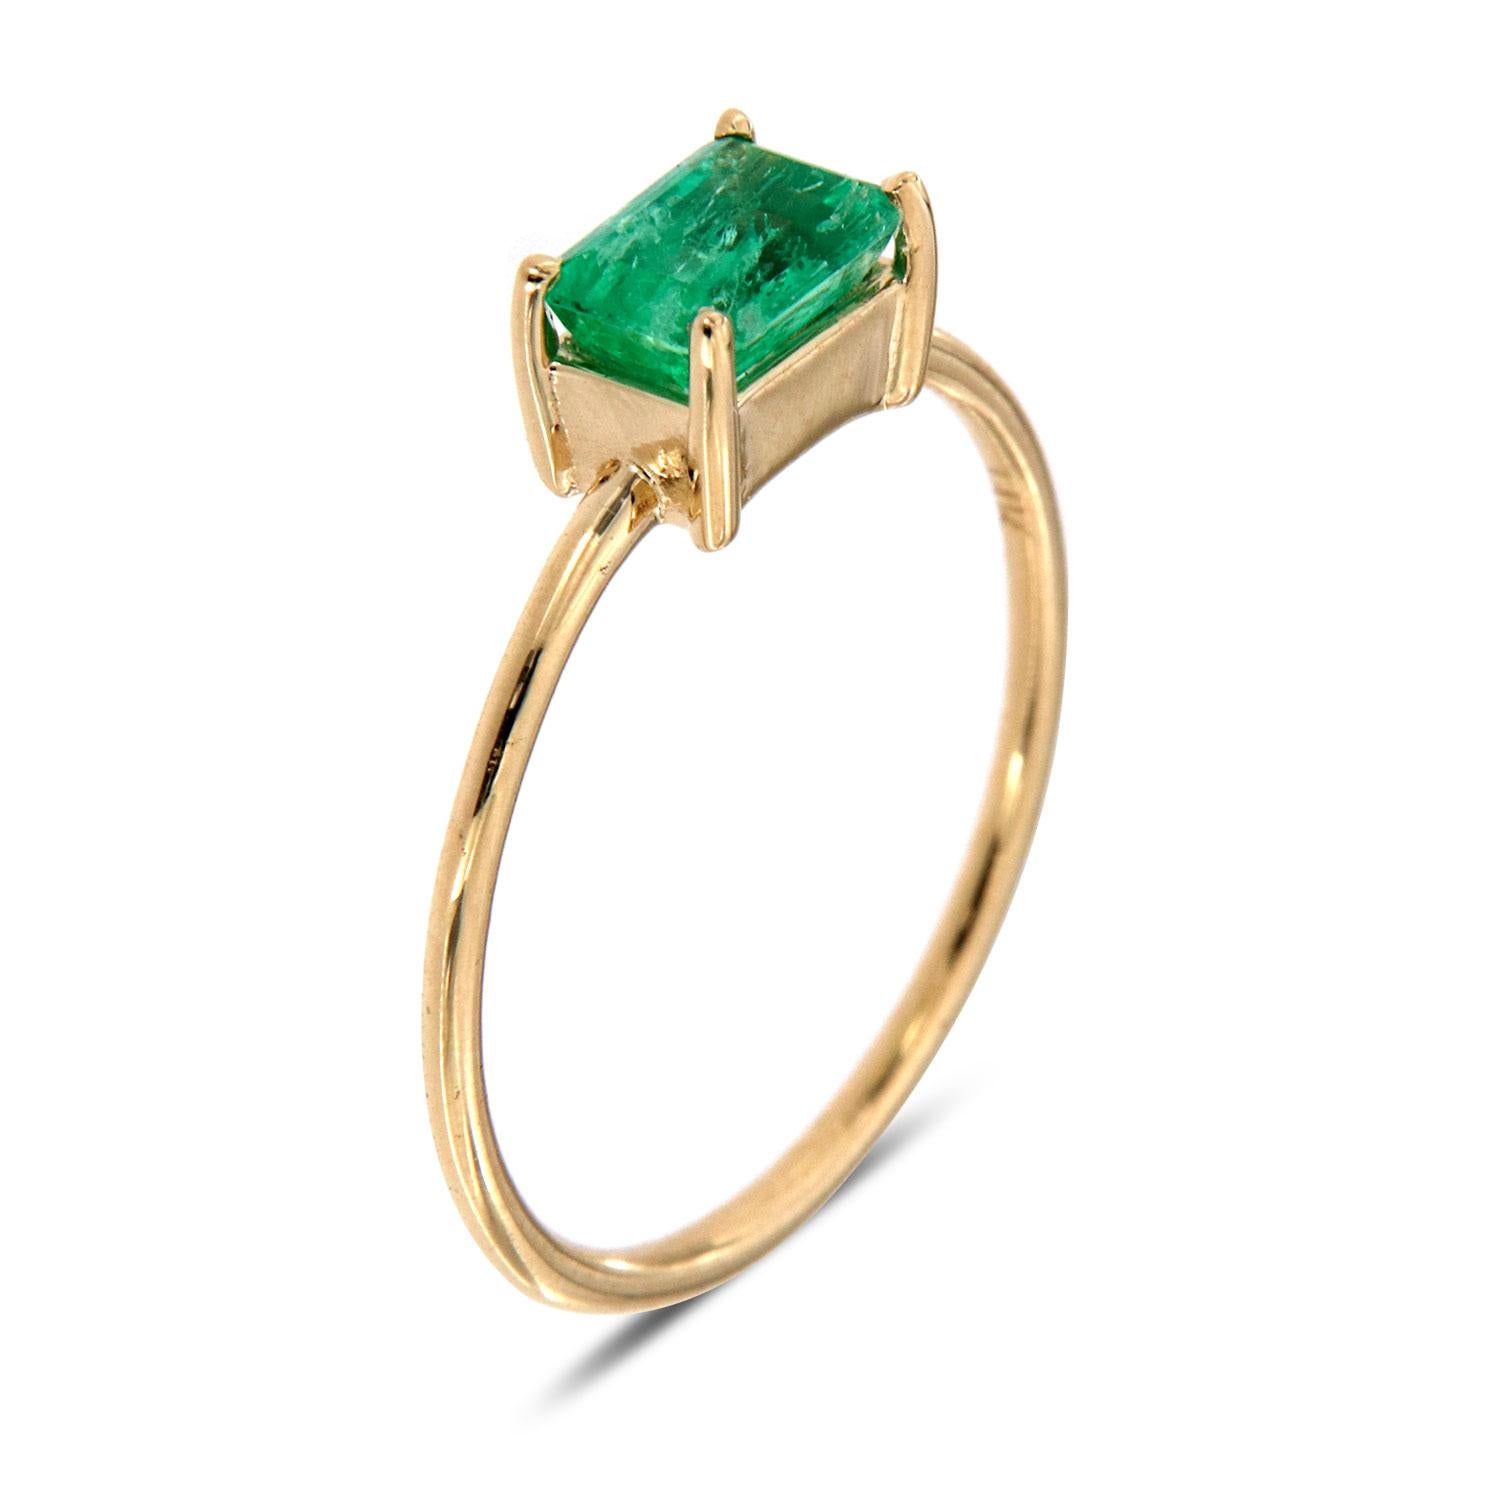 This minimalist solitaire ring features an O.60-carat Emerald Shape Colombia Green Emerald prong set on a 1.2 mm wide band. The heavily natural inclusions in the gem give it a rustic look. Experience the difference in person!

Product details: